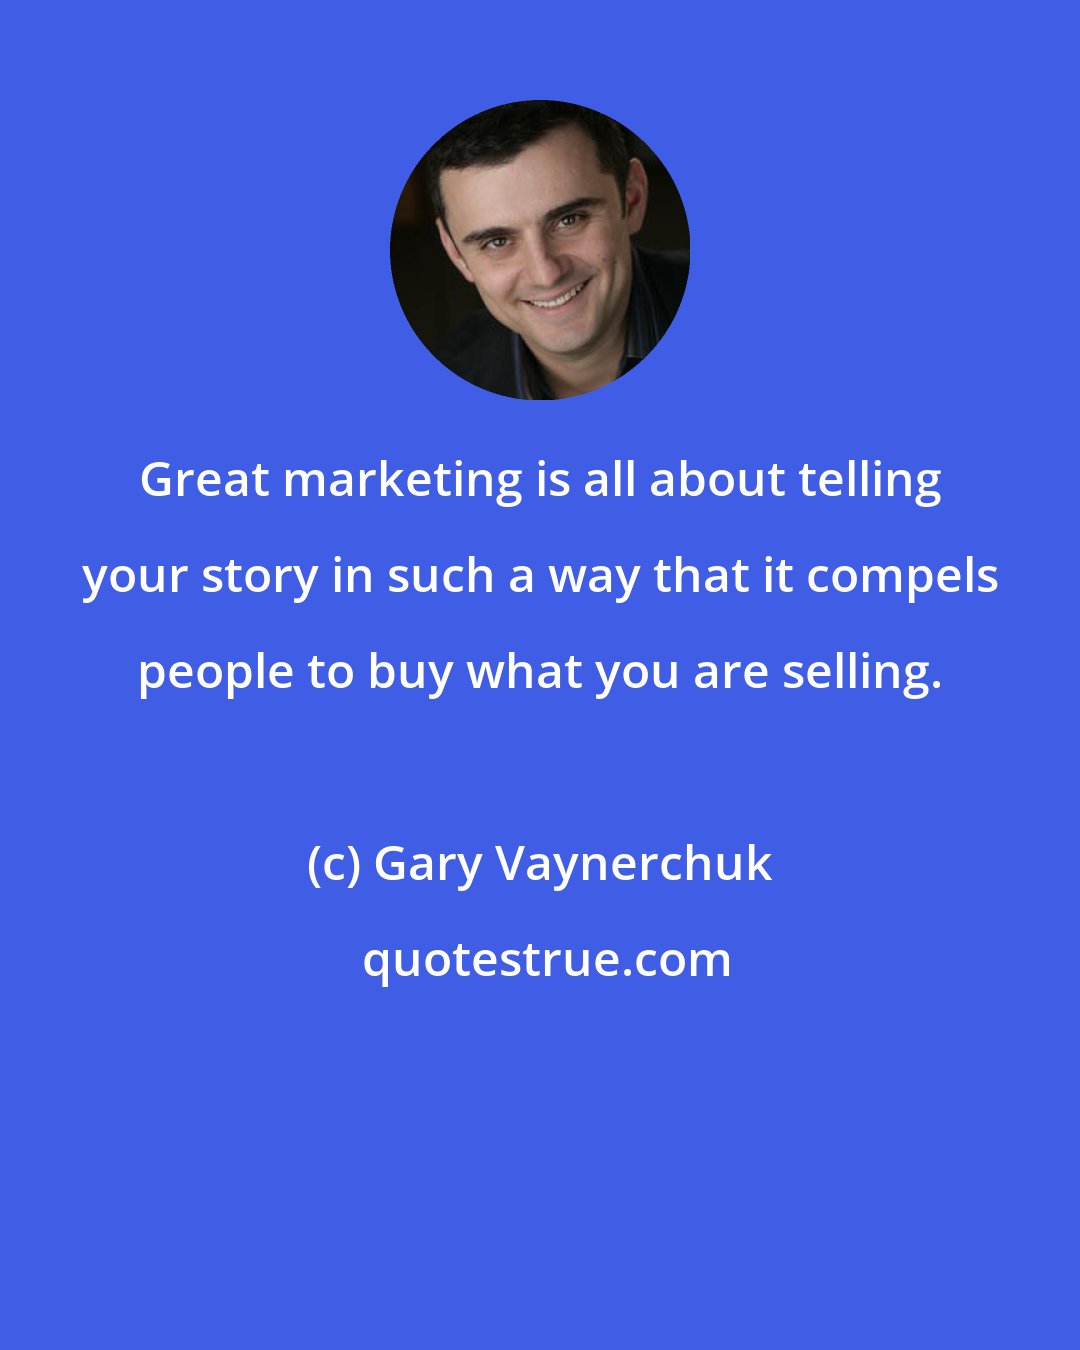 Gary Vaynerchuk: Great marketing is all about telling your story in such a way that it compels people to buy what you are selling.